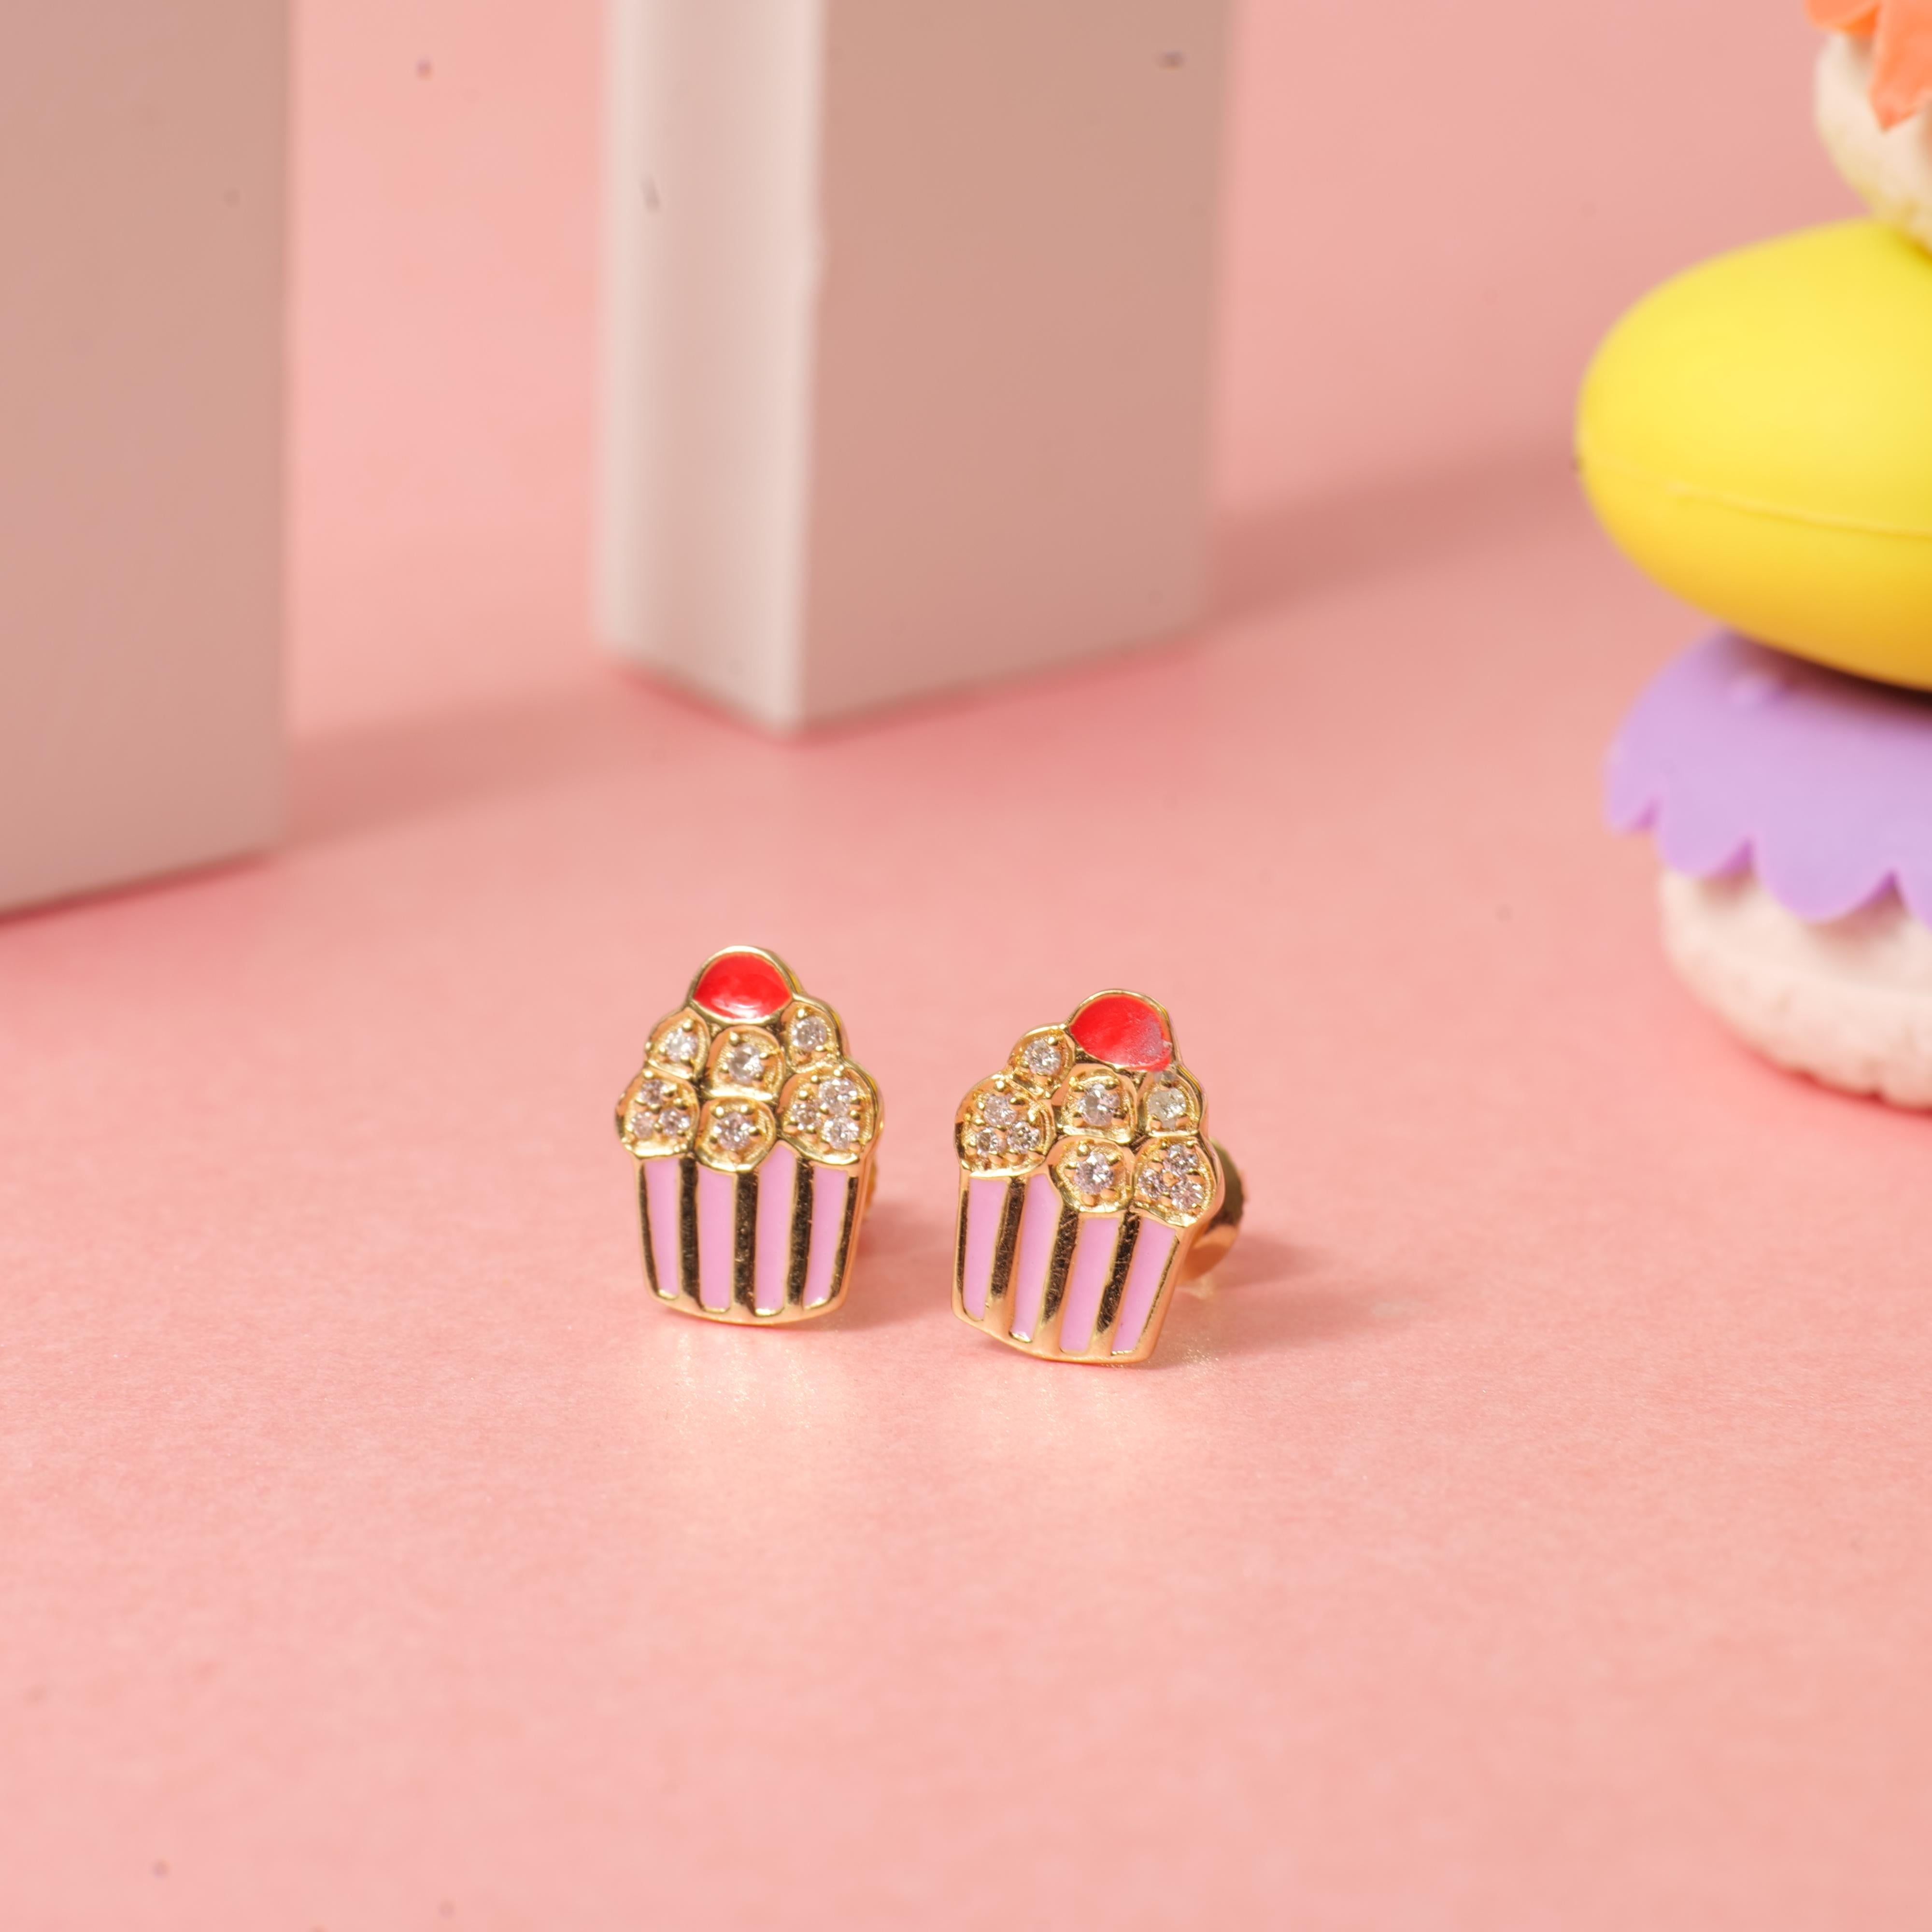 Cute Enameled Cupcake Diamond Earrings for Girls/Kids/Toddlers in 18K Solid Gold In New Condition For Sale In New Delhi, DL